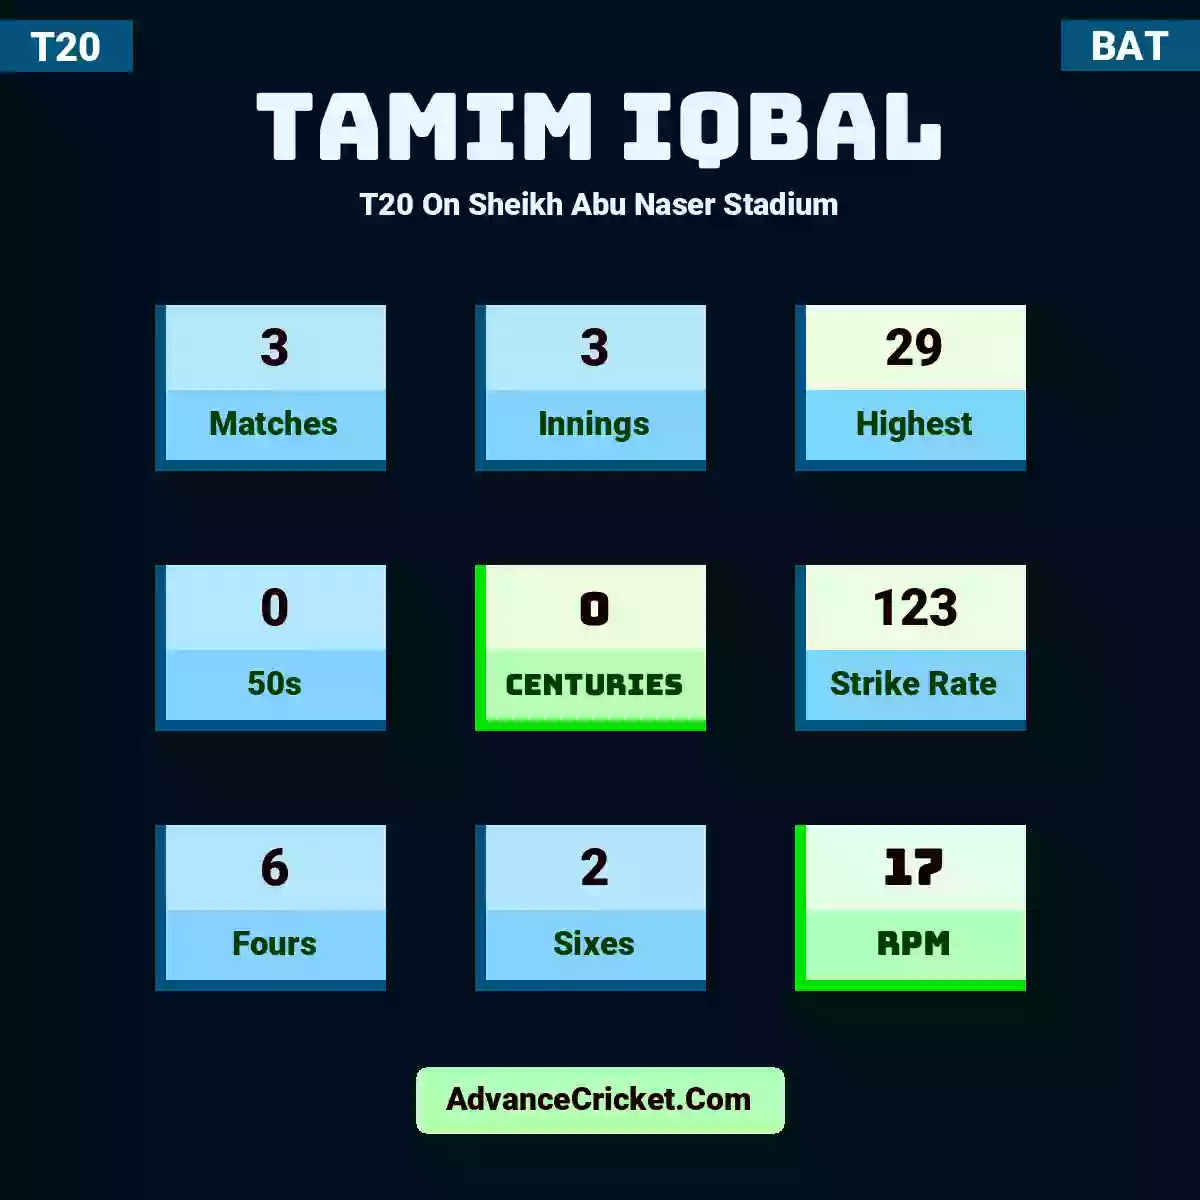 Tamim Iqbal T20  On Sheikh Abu Naser Stadium, Tamim Iqbal played 3 matches, scored 29 runs as highest, 0 half-centuries, and 0 centuries, with a strike rate of 123. T.Iqbal hit 6 fours and 2 sixes, with an RPM of 17.